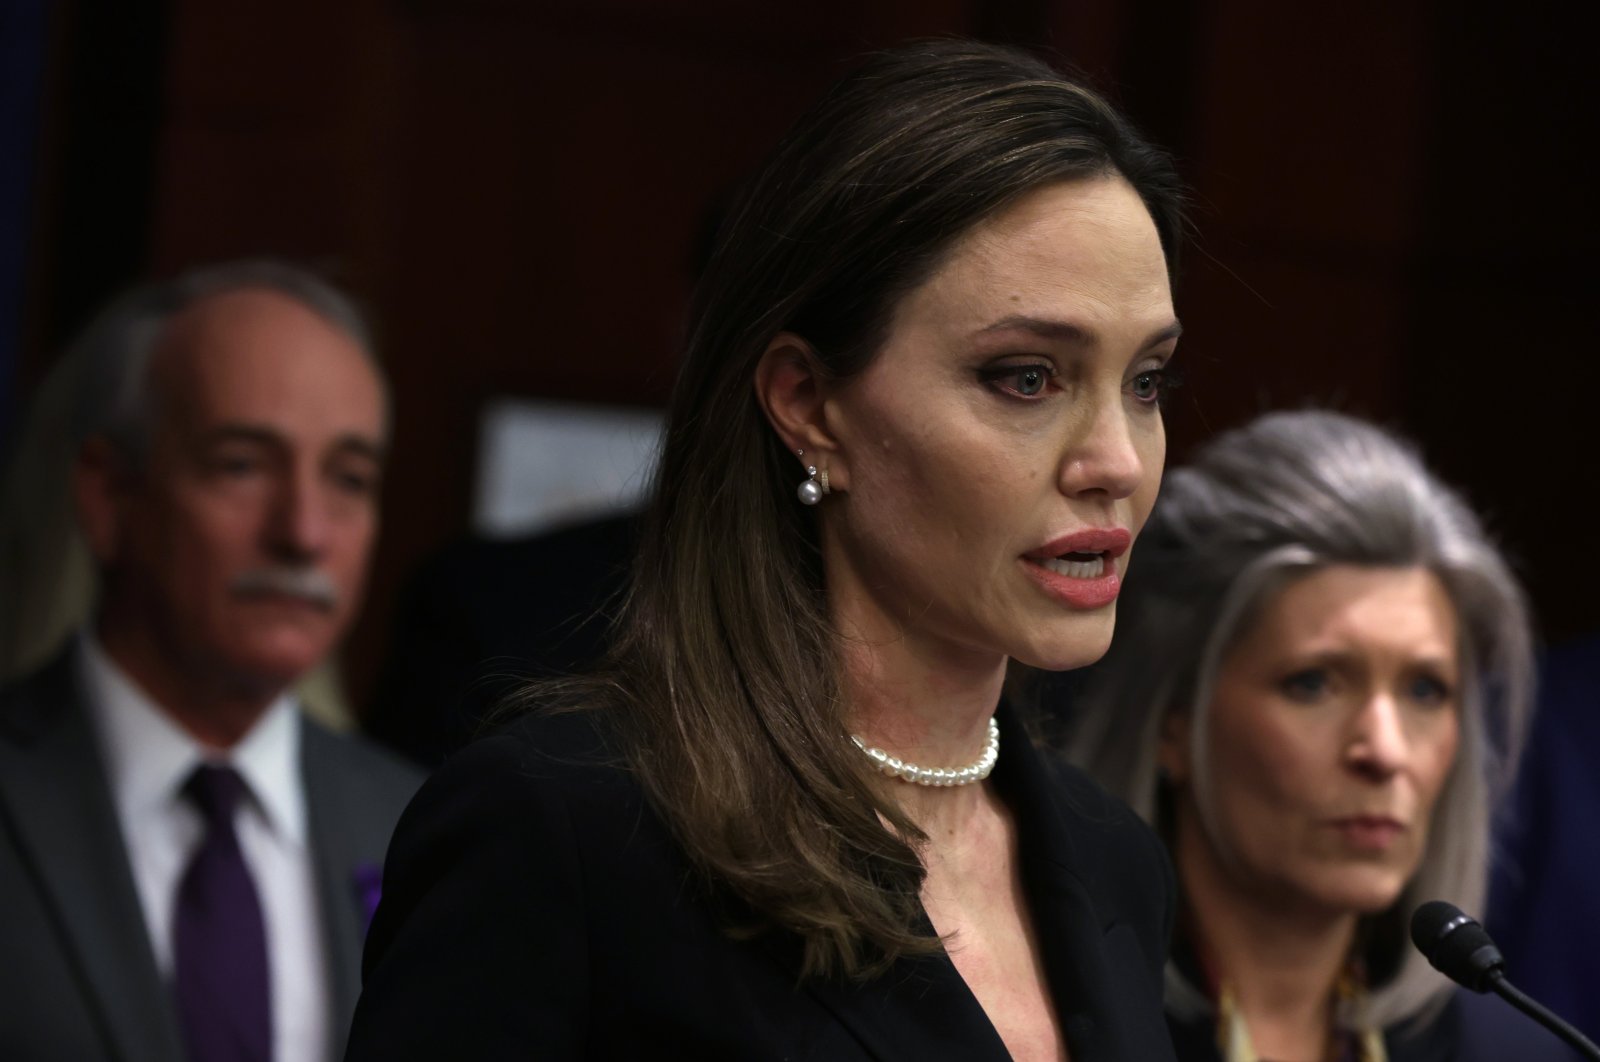 Actor Angelina Jolie speaks during a news conference at the U.S. Capitol, Washington, D.C., U.S., Feb.9, 2022. (Getty Images Photo)